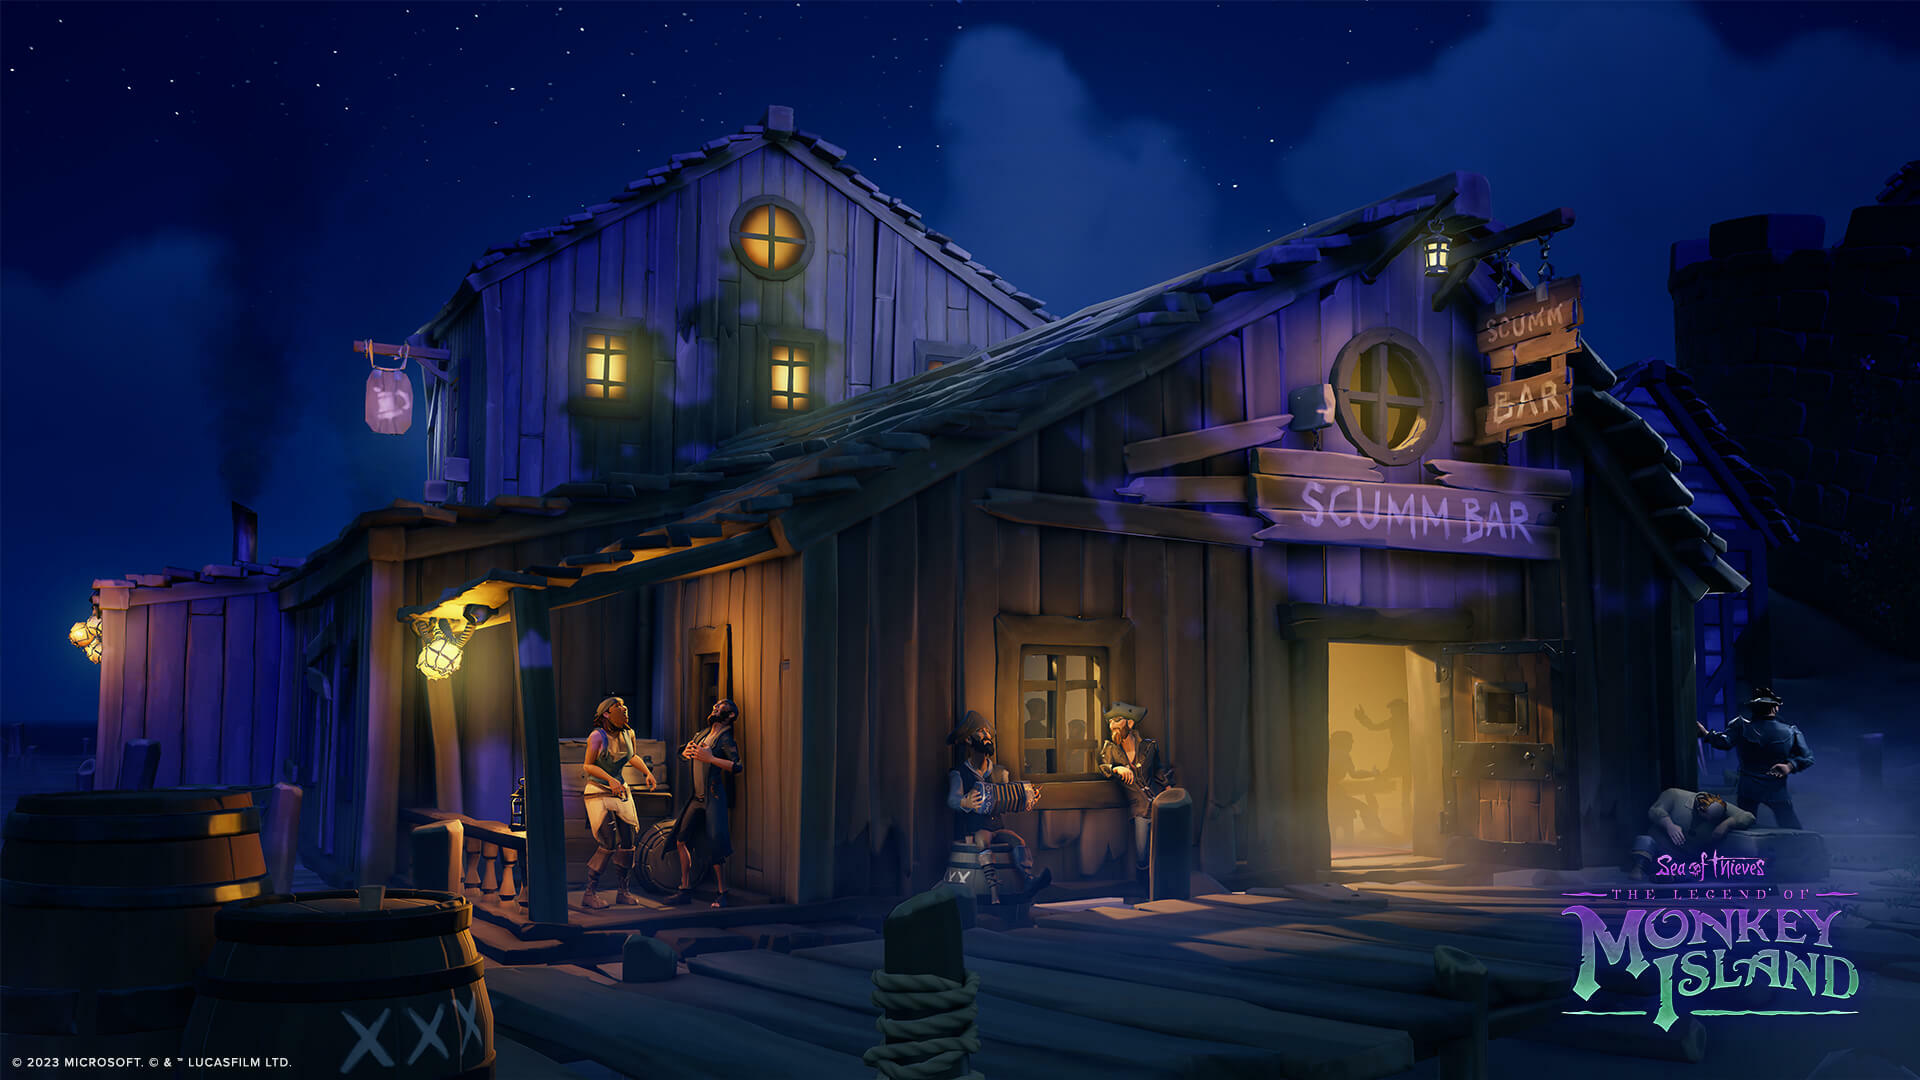 Sea of Thieves wraps up its Monkey Island crossover with The Lair